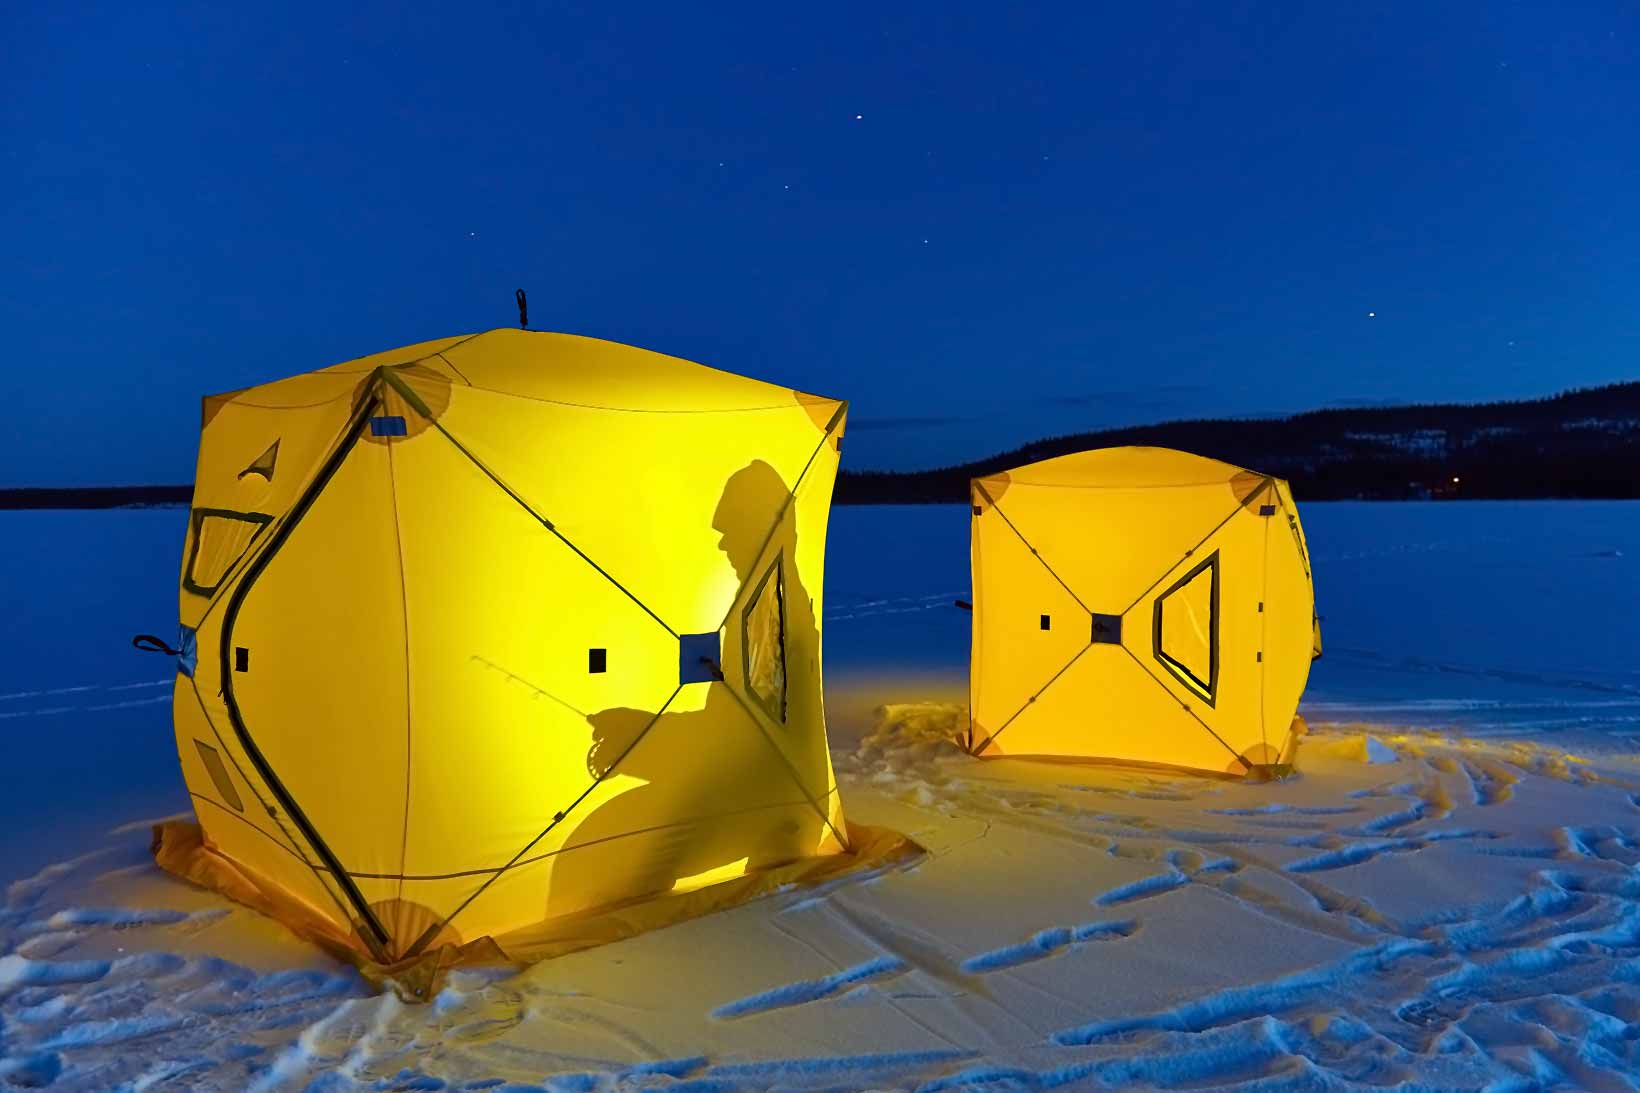 Ice fishing in tents